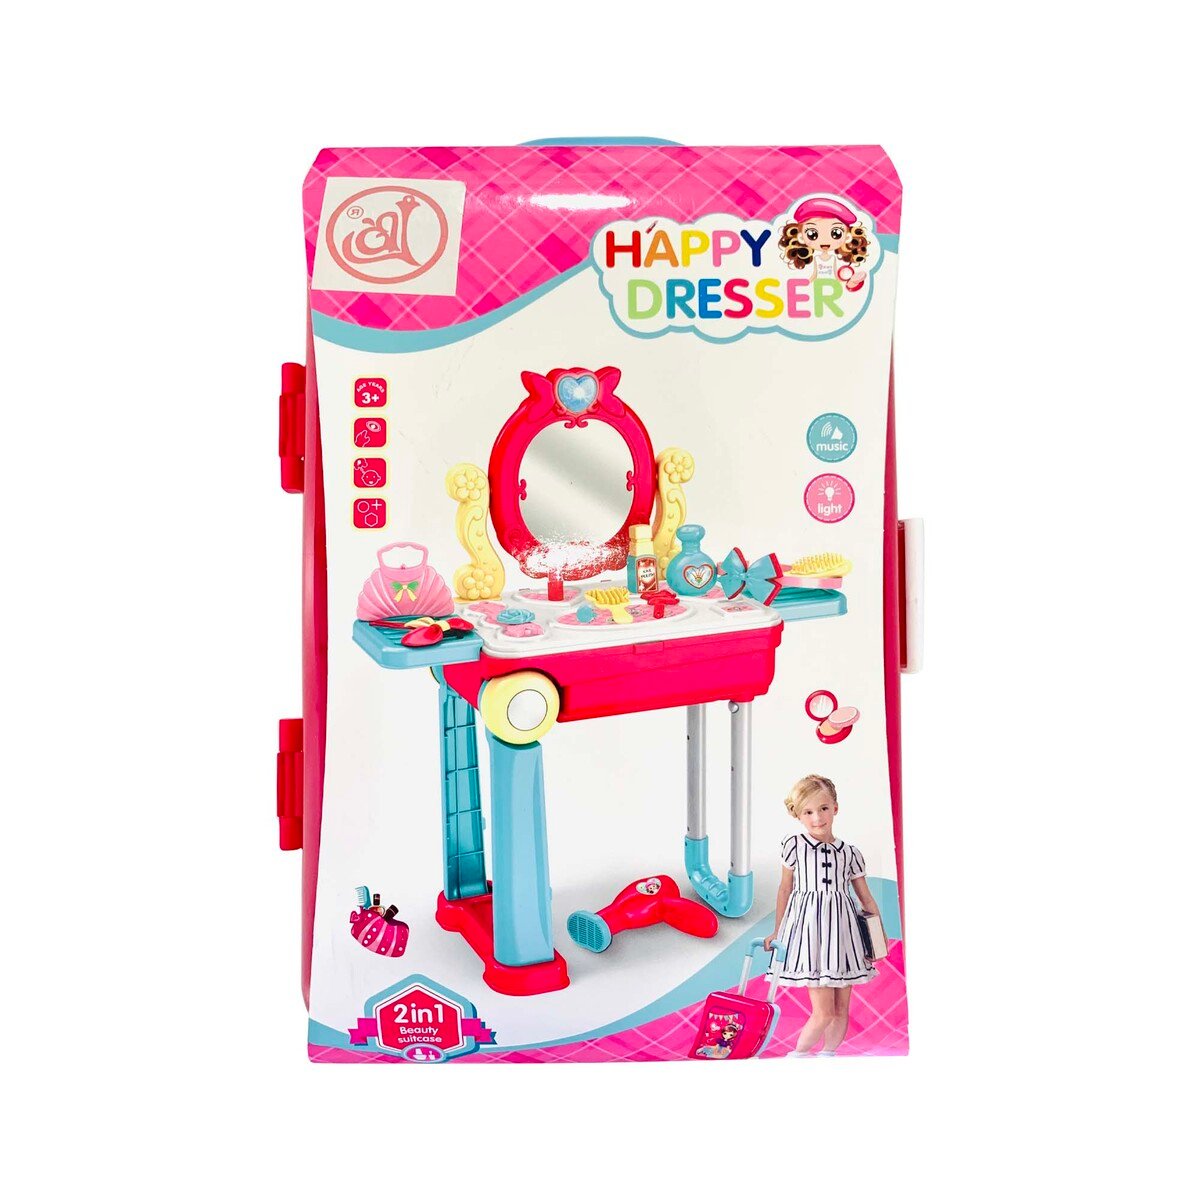 Lovely Baby Beauty Luggage Set 678208A